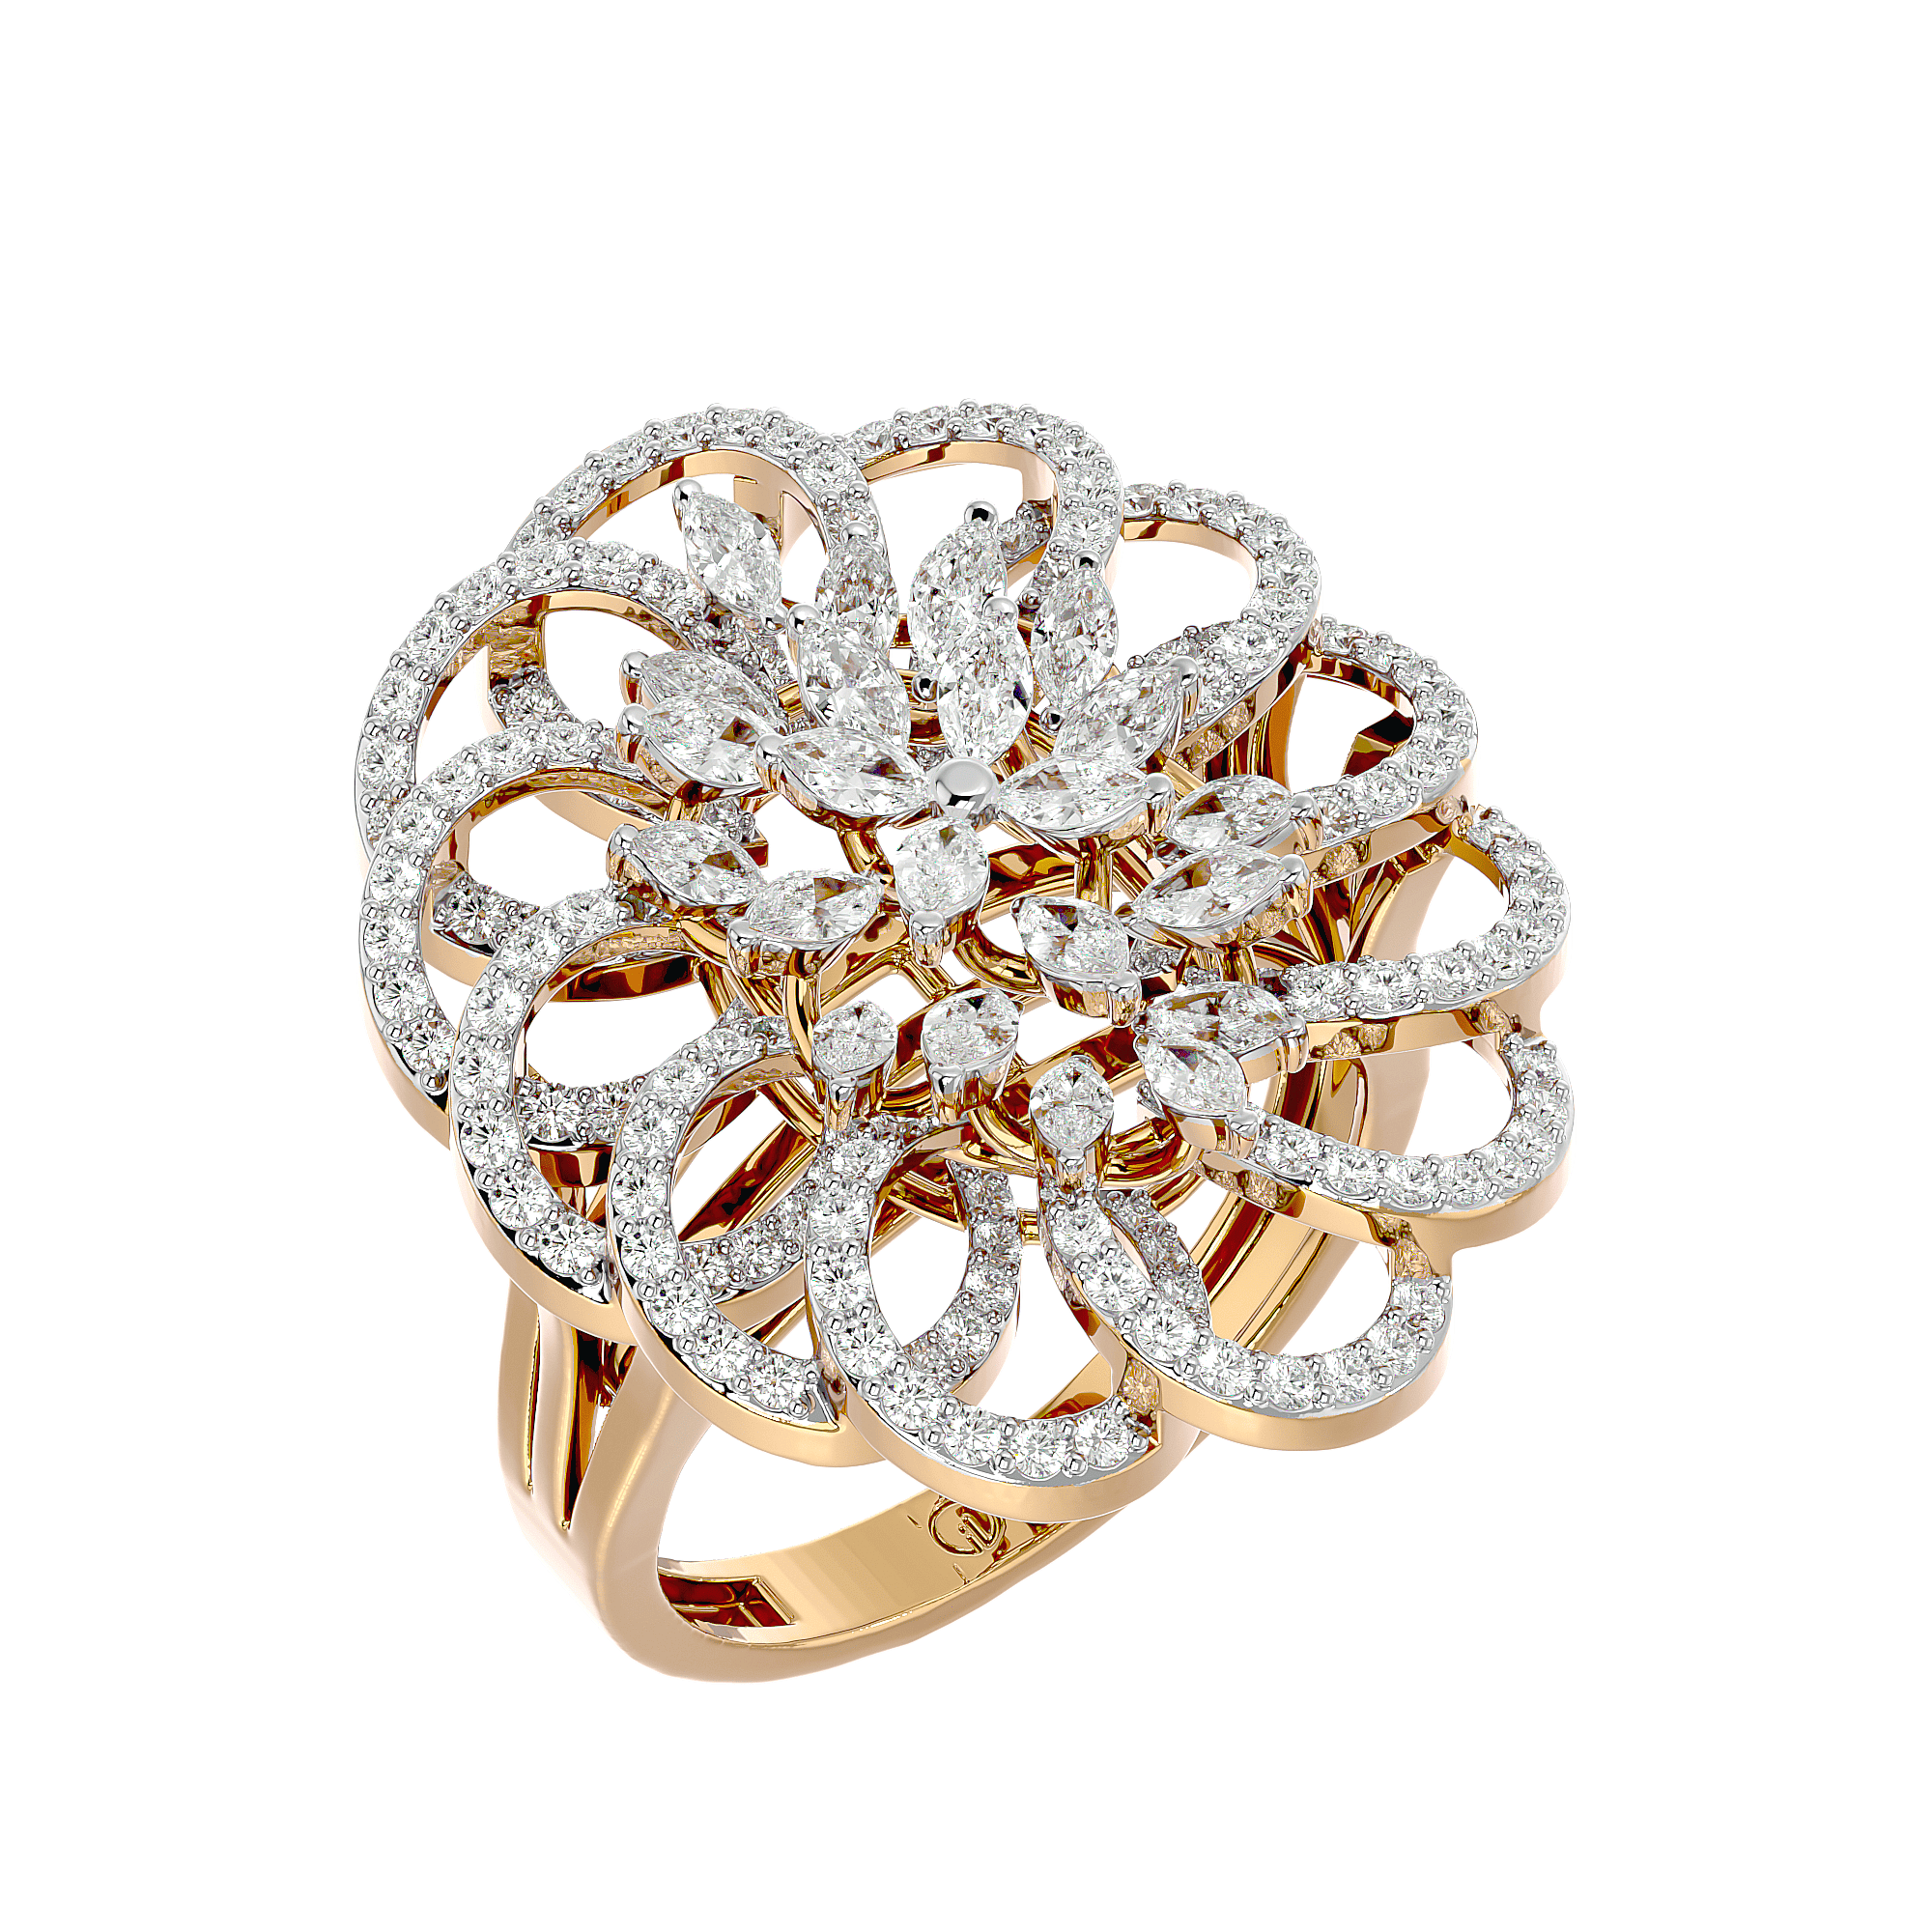 Blooming-Opulence-Diamond-Ring-RG1532A-View-01